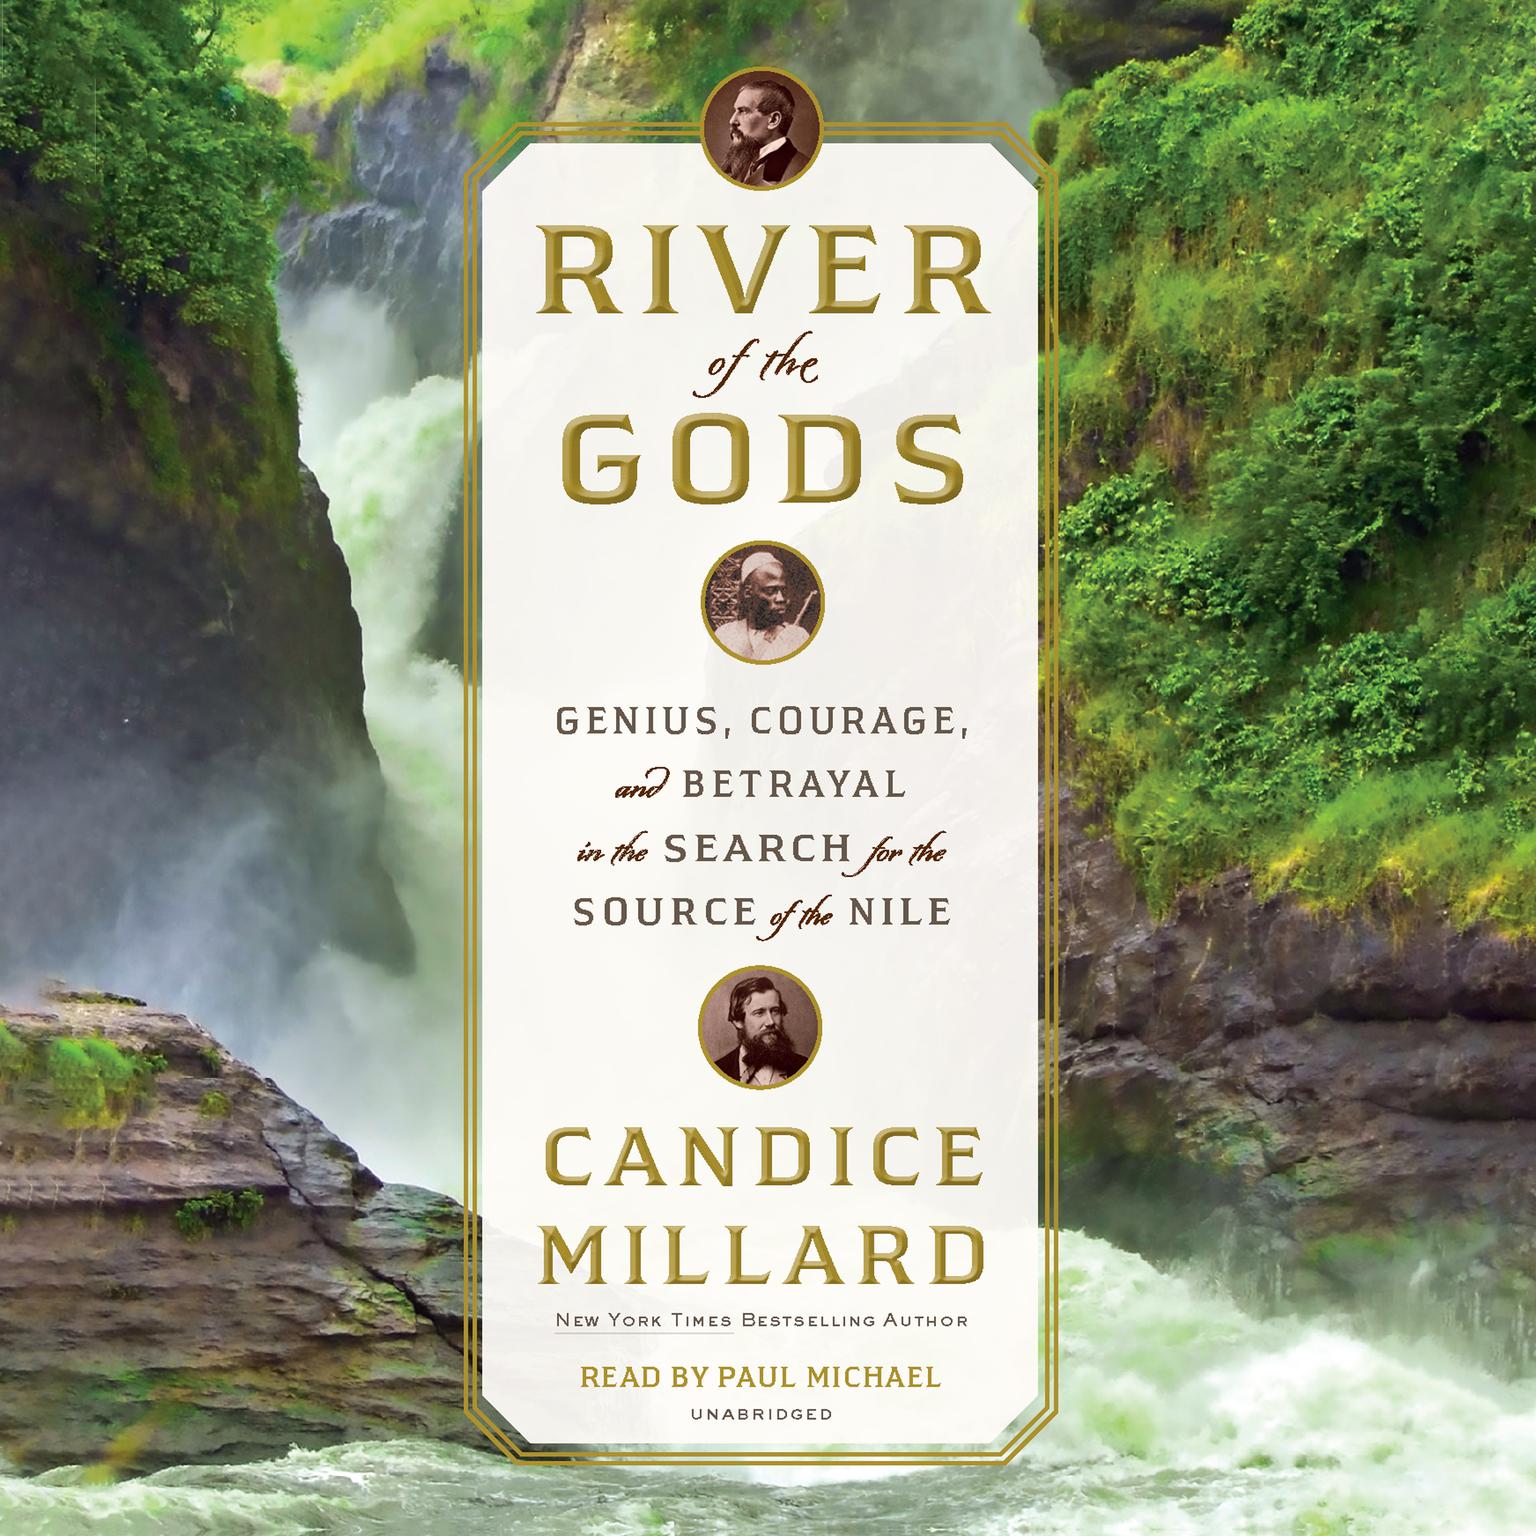 River of the Gods: Genius, Courage, and Betrayal in the Search for the Source of the Nile Audiobook, by Candice Millard